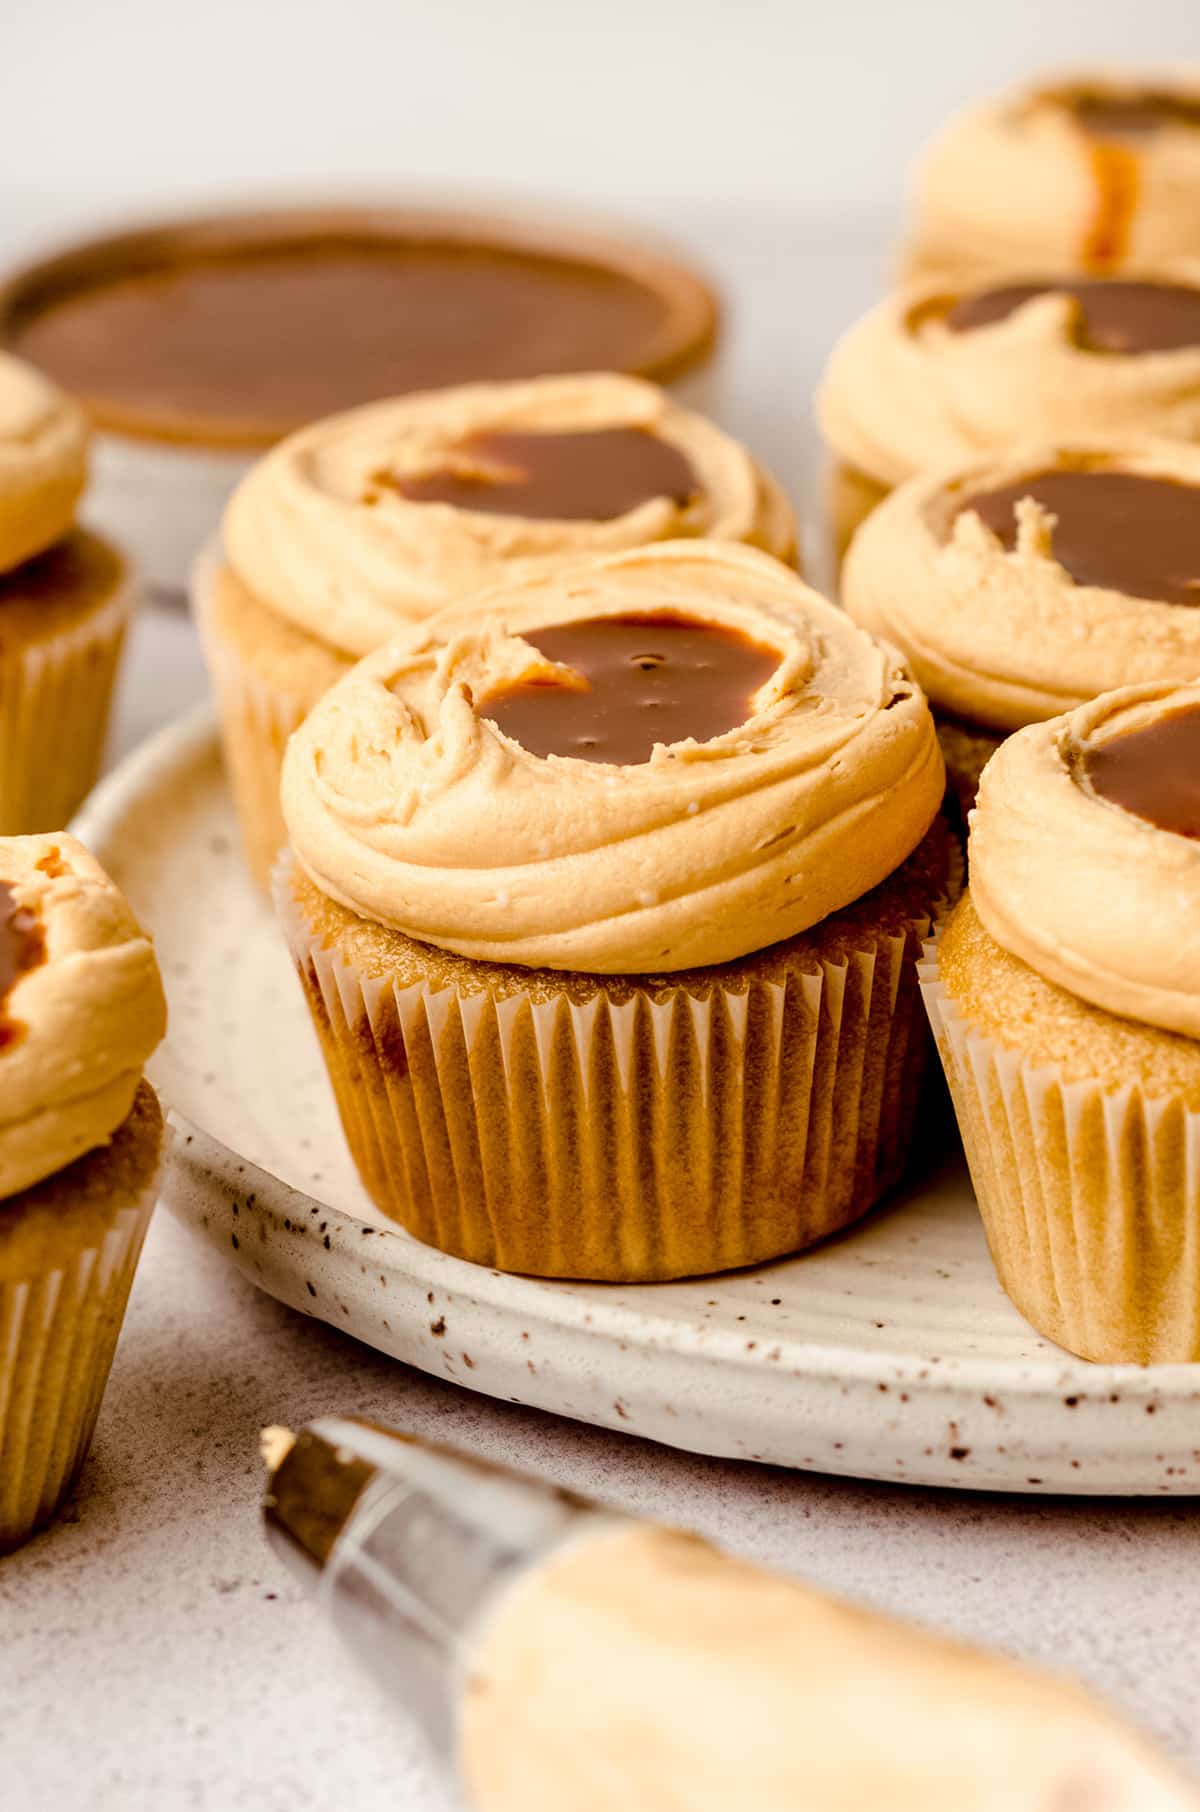 A plate filled with dulce de leche cupcakes, with a piping bag in the foreground.